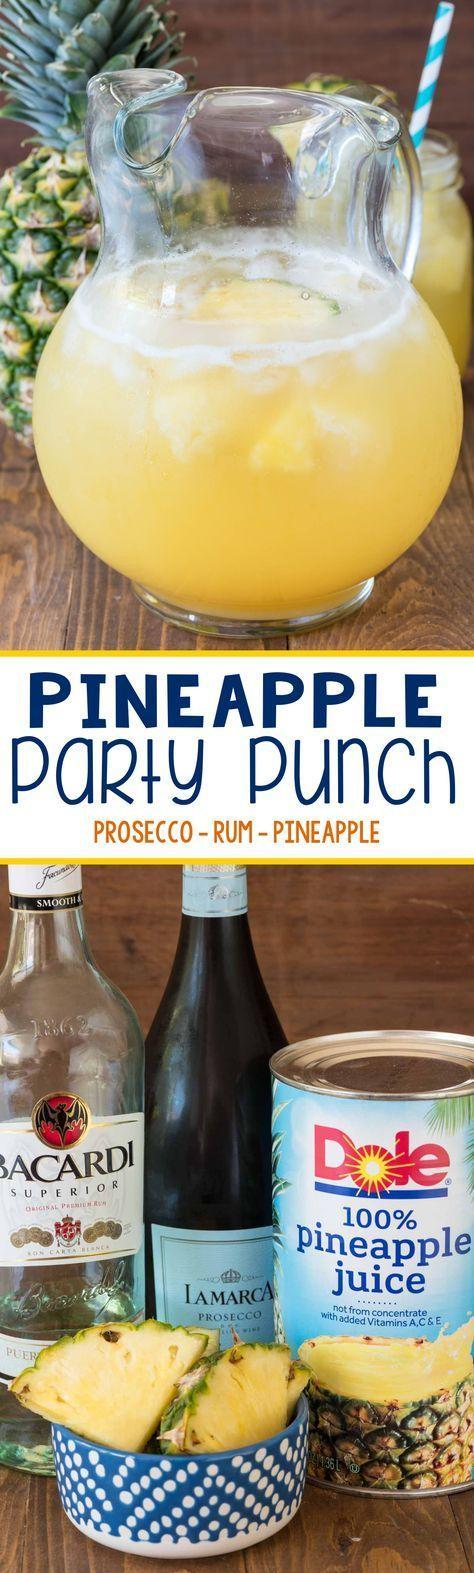 Wedding - Pineapple Party Punch